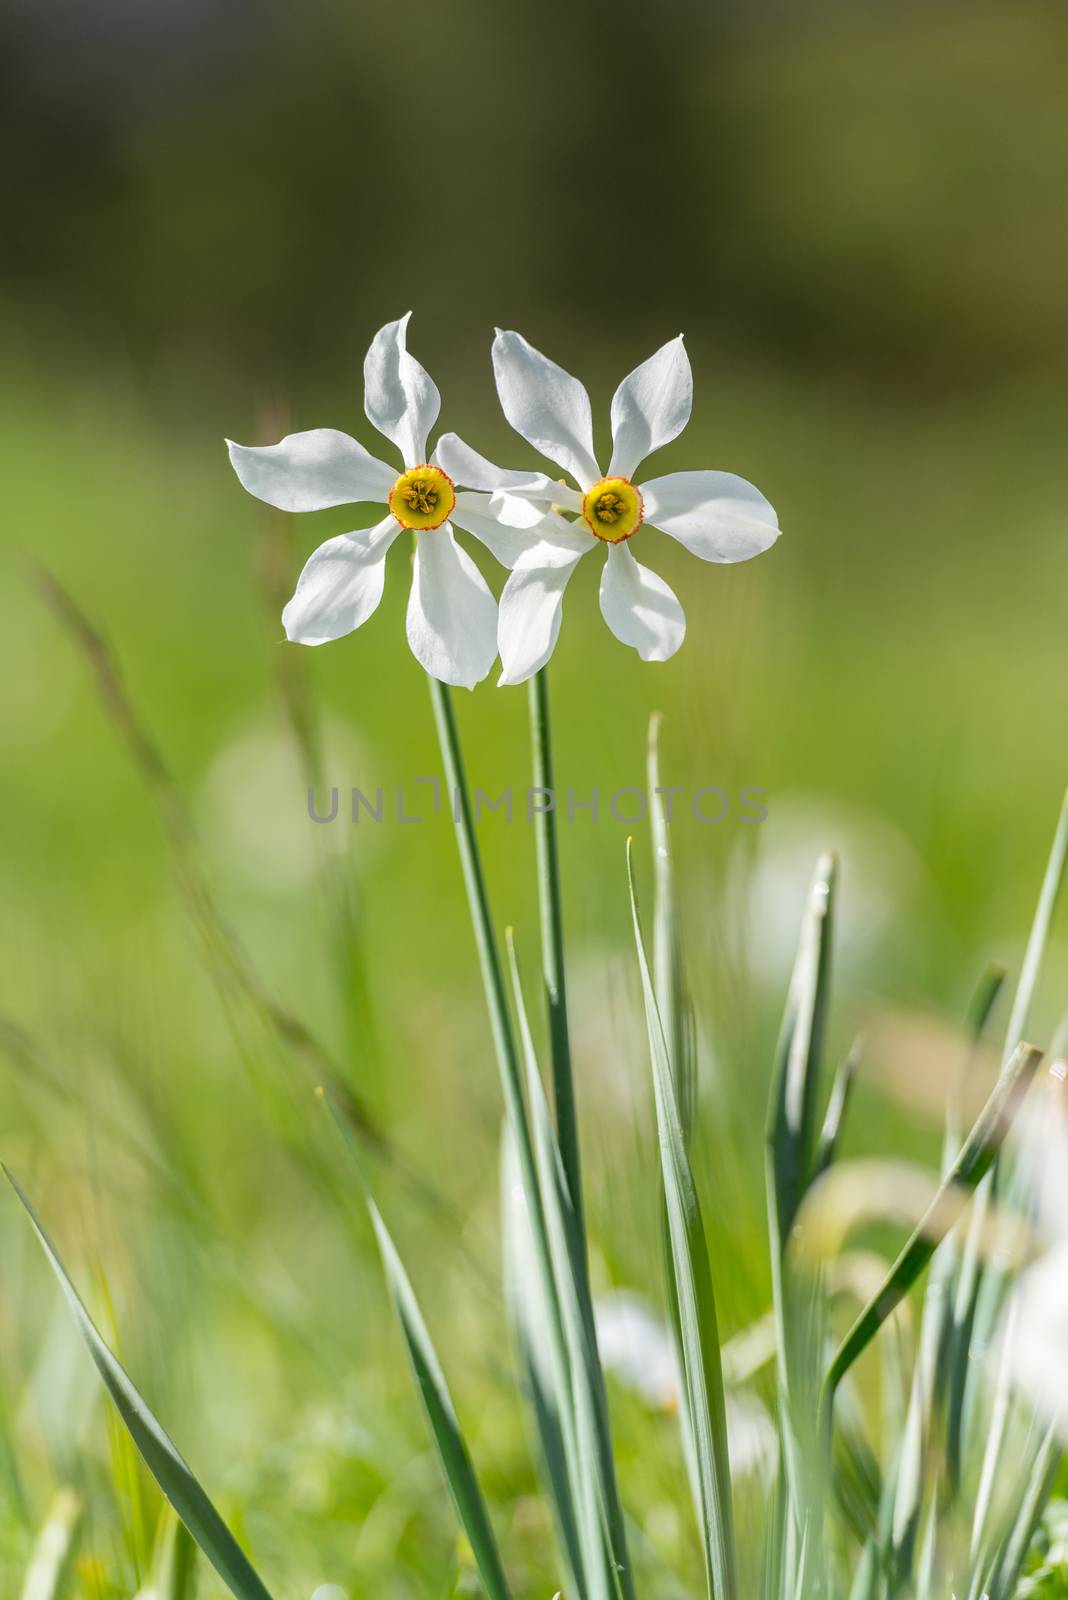 Grandalla. Narcissus poeticus
Symbolic flower of Andorra by martinscphoto